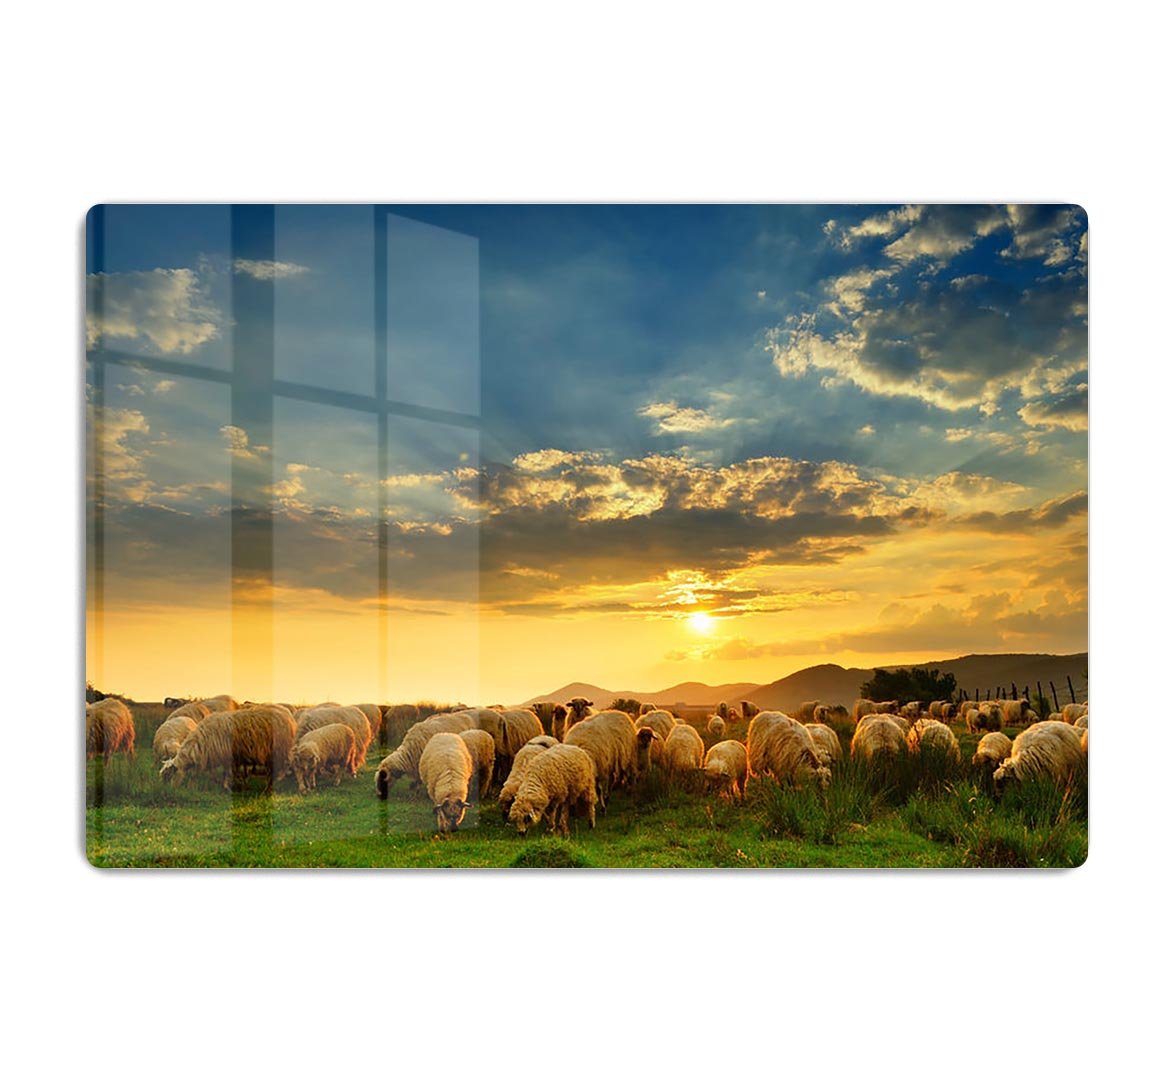 Flock of sheep grazing in a hill at sunset HD Metal Print - Canvas Art Rocks - 1